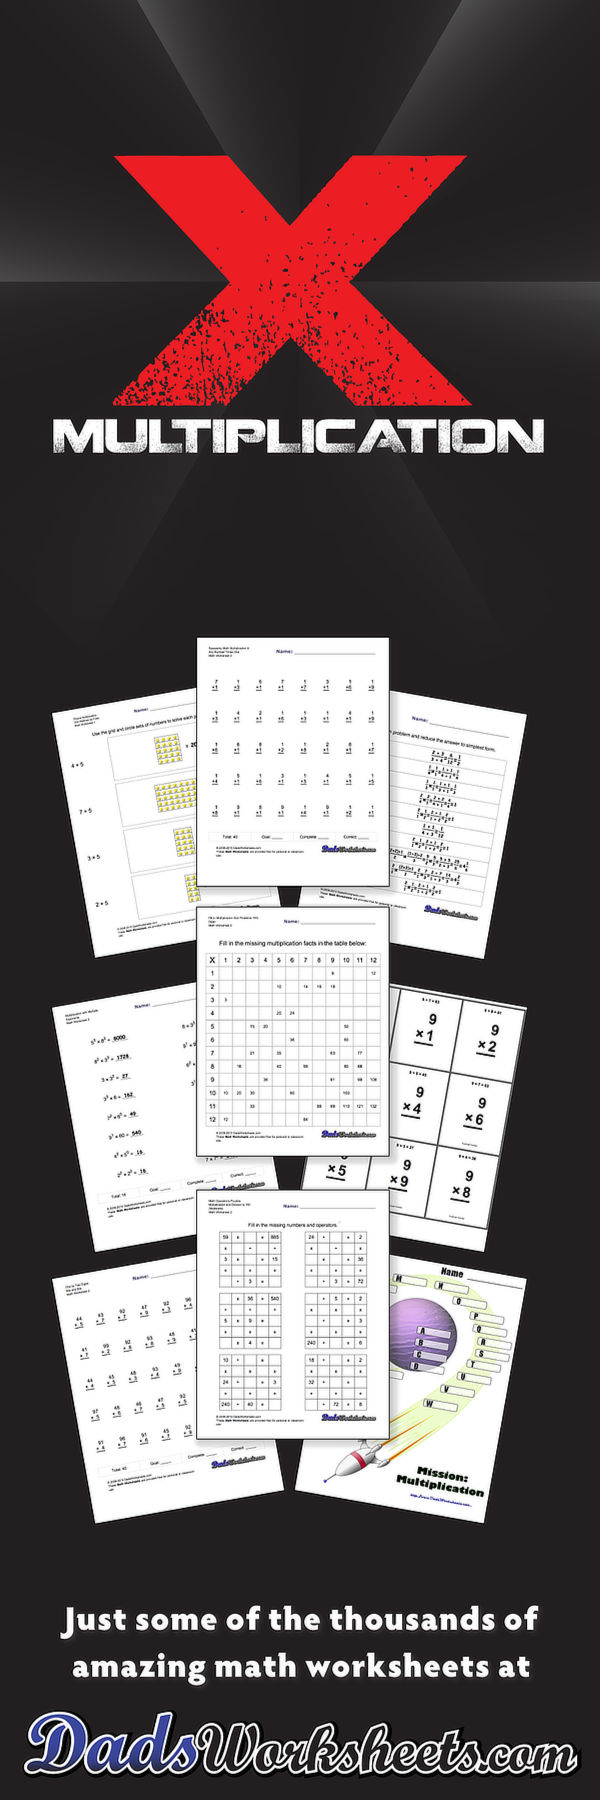 844 Free Multiplication Worksheets For Third, Fourth And